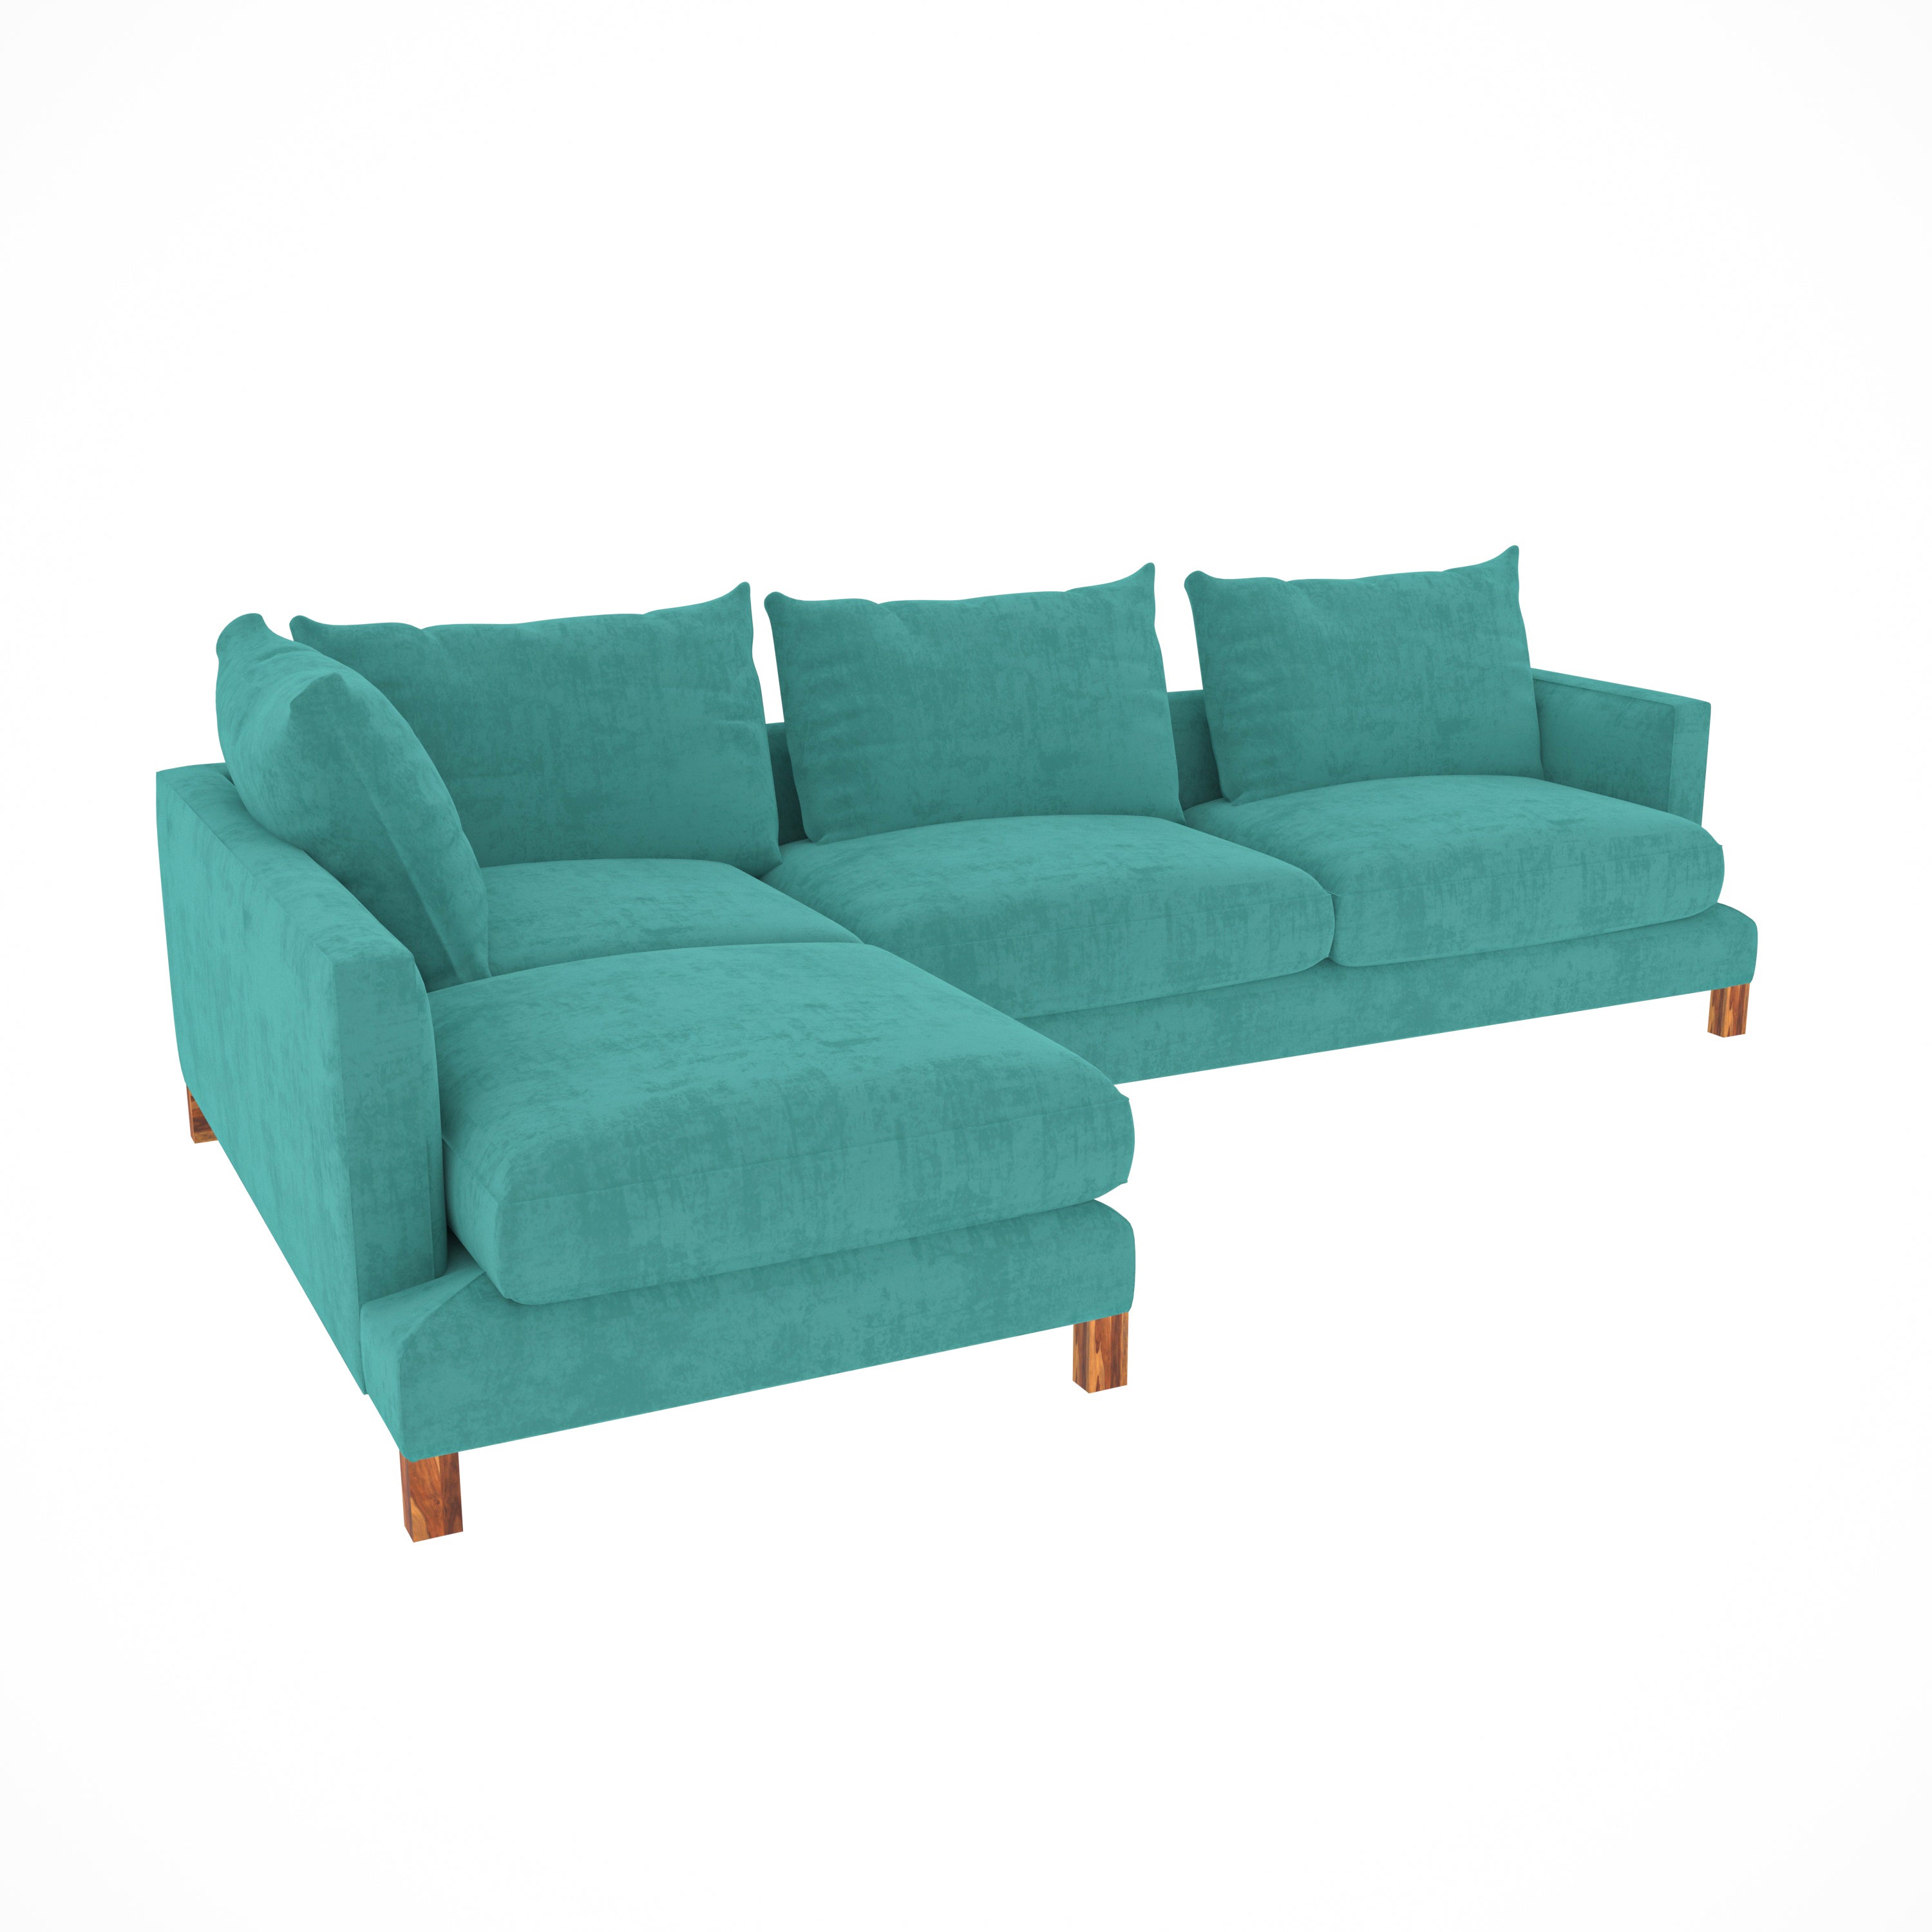 Sea Green Pastel Coloured with Premium Comfort L Shaped 4 Seater Sofa Set for Home Sofa